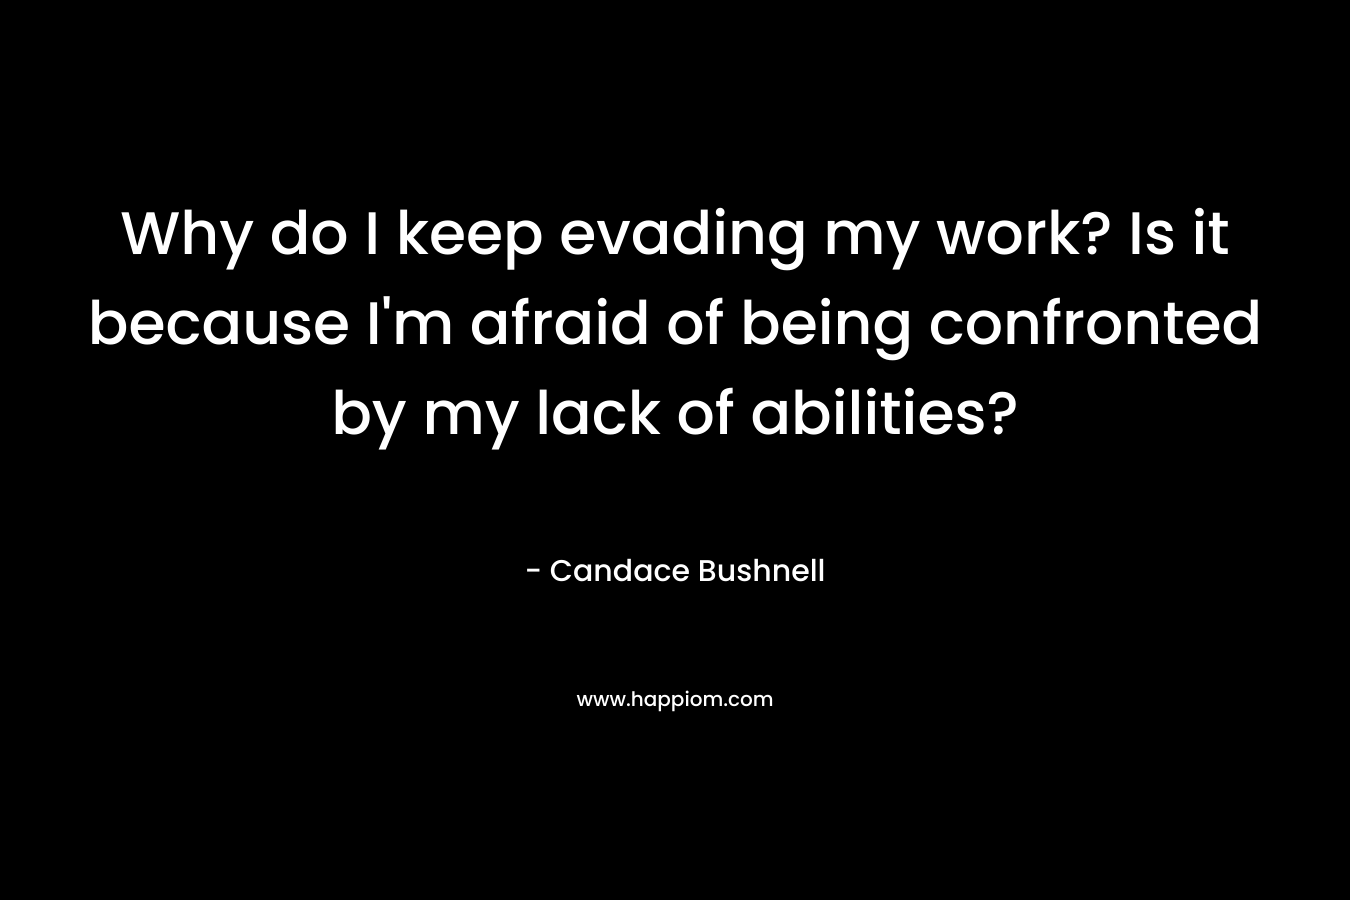 Why do I keep evading my work? Is it because I’m afraid of being confronted by my lack of abilities? – Candace Bushnell